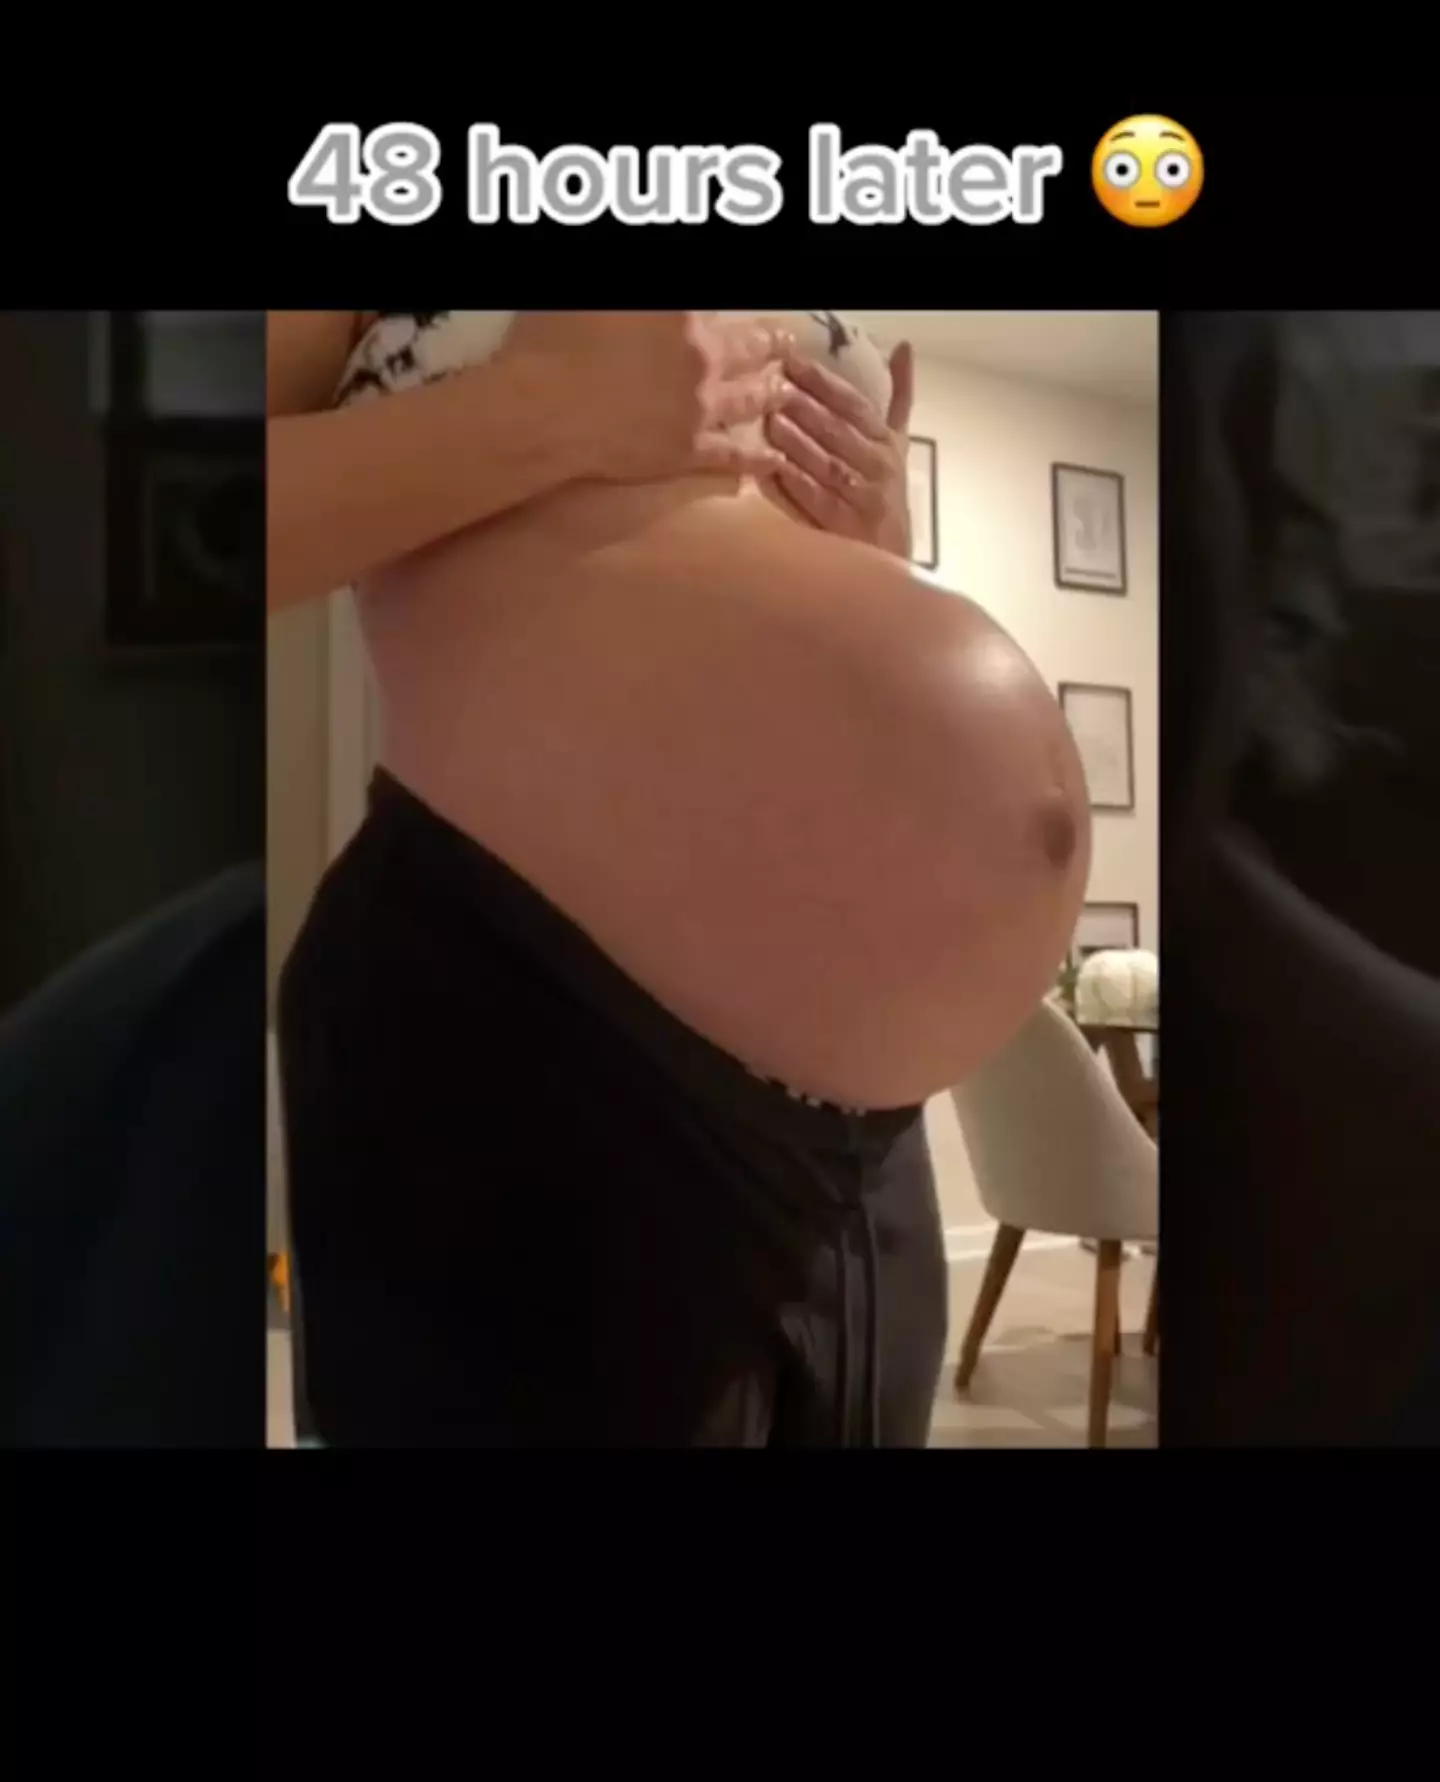 Just 48 hours after the recording, her stomach looked completely different.